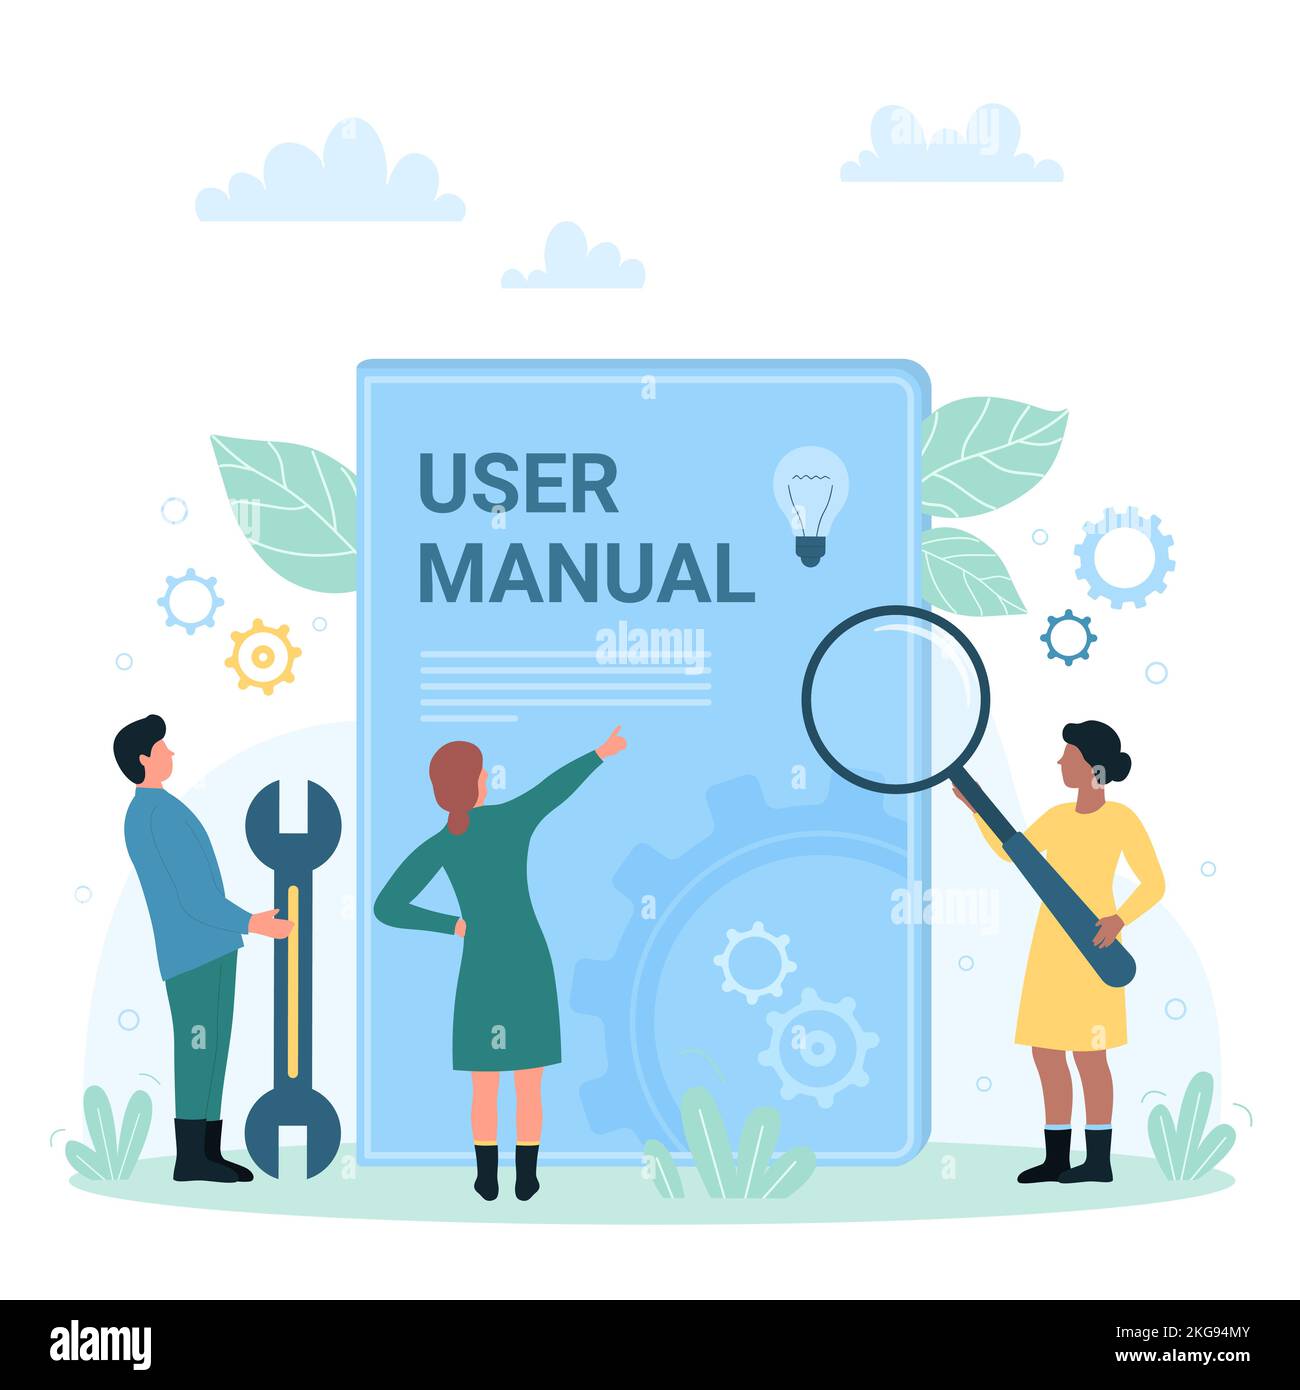 User manual handbook vector illustration. Cartoon tiny people look through magnifier at book with guide and instructions, characters use search for answers to questions, ask and read information Stock Vector